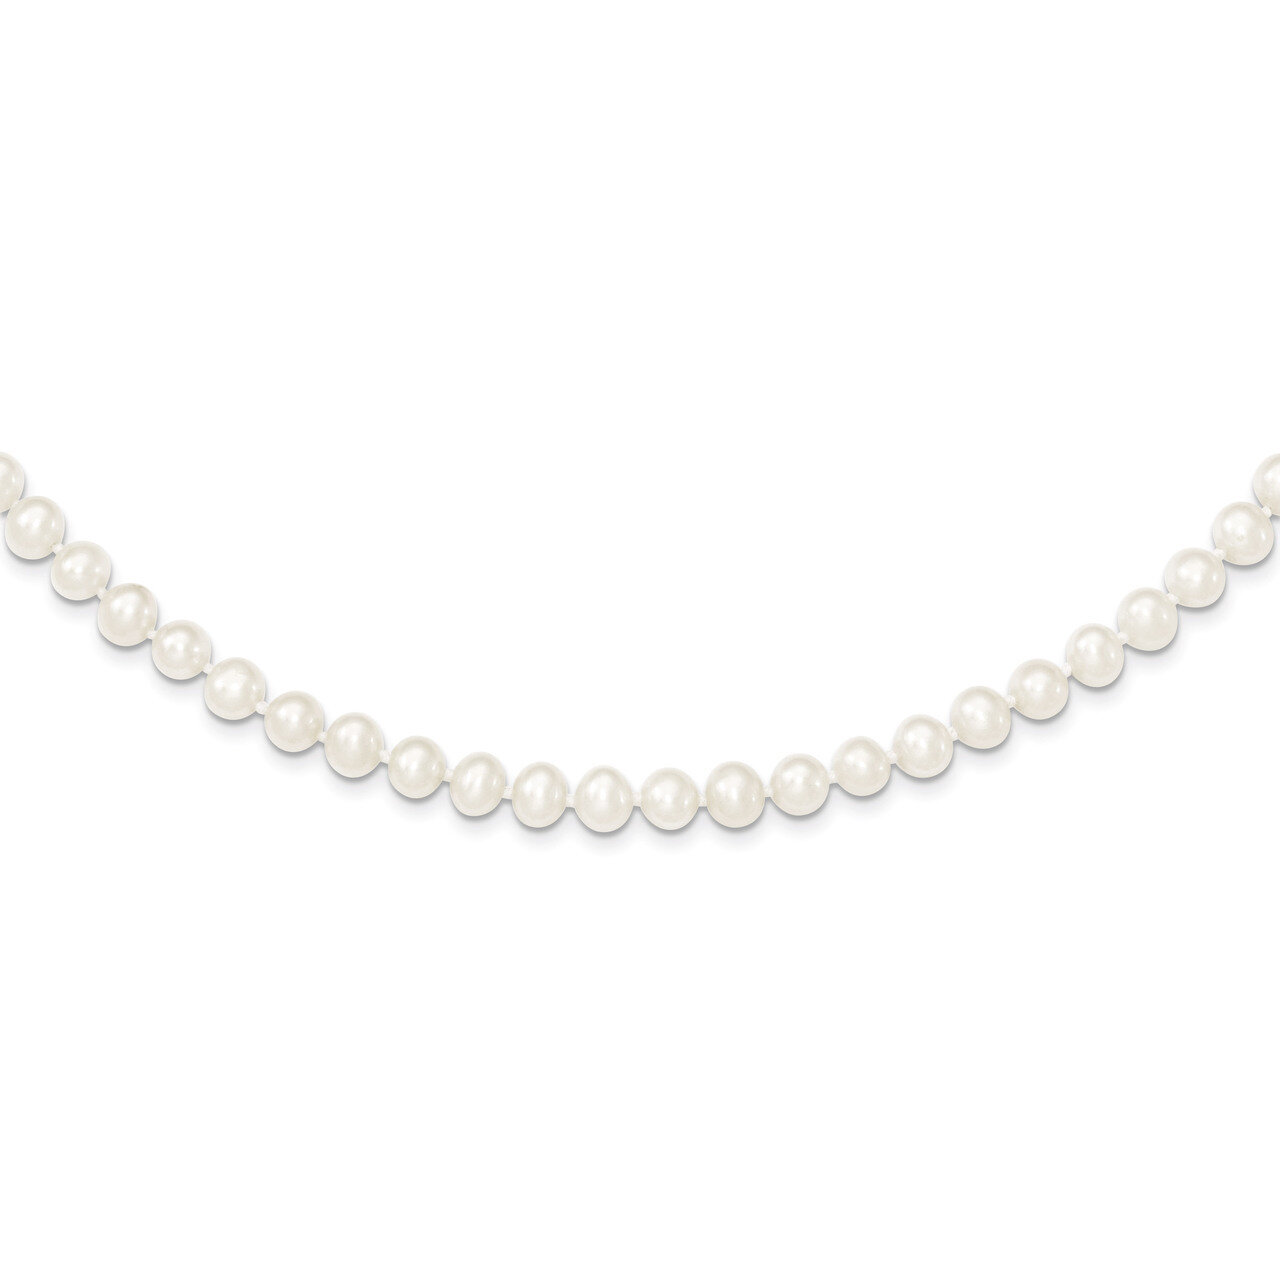 5-6mm White Cultured Pearl Necklace Sterling Silver QH4769-16